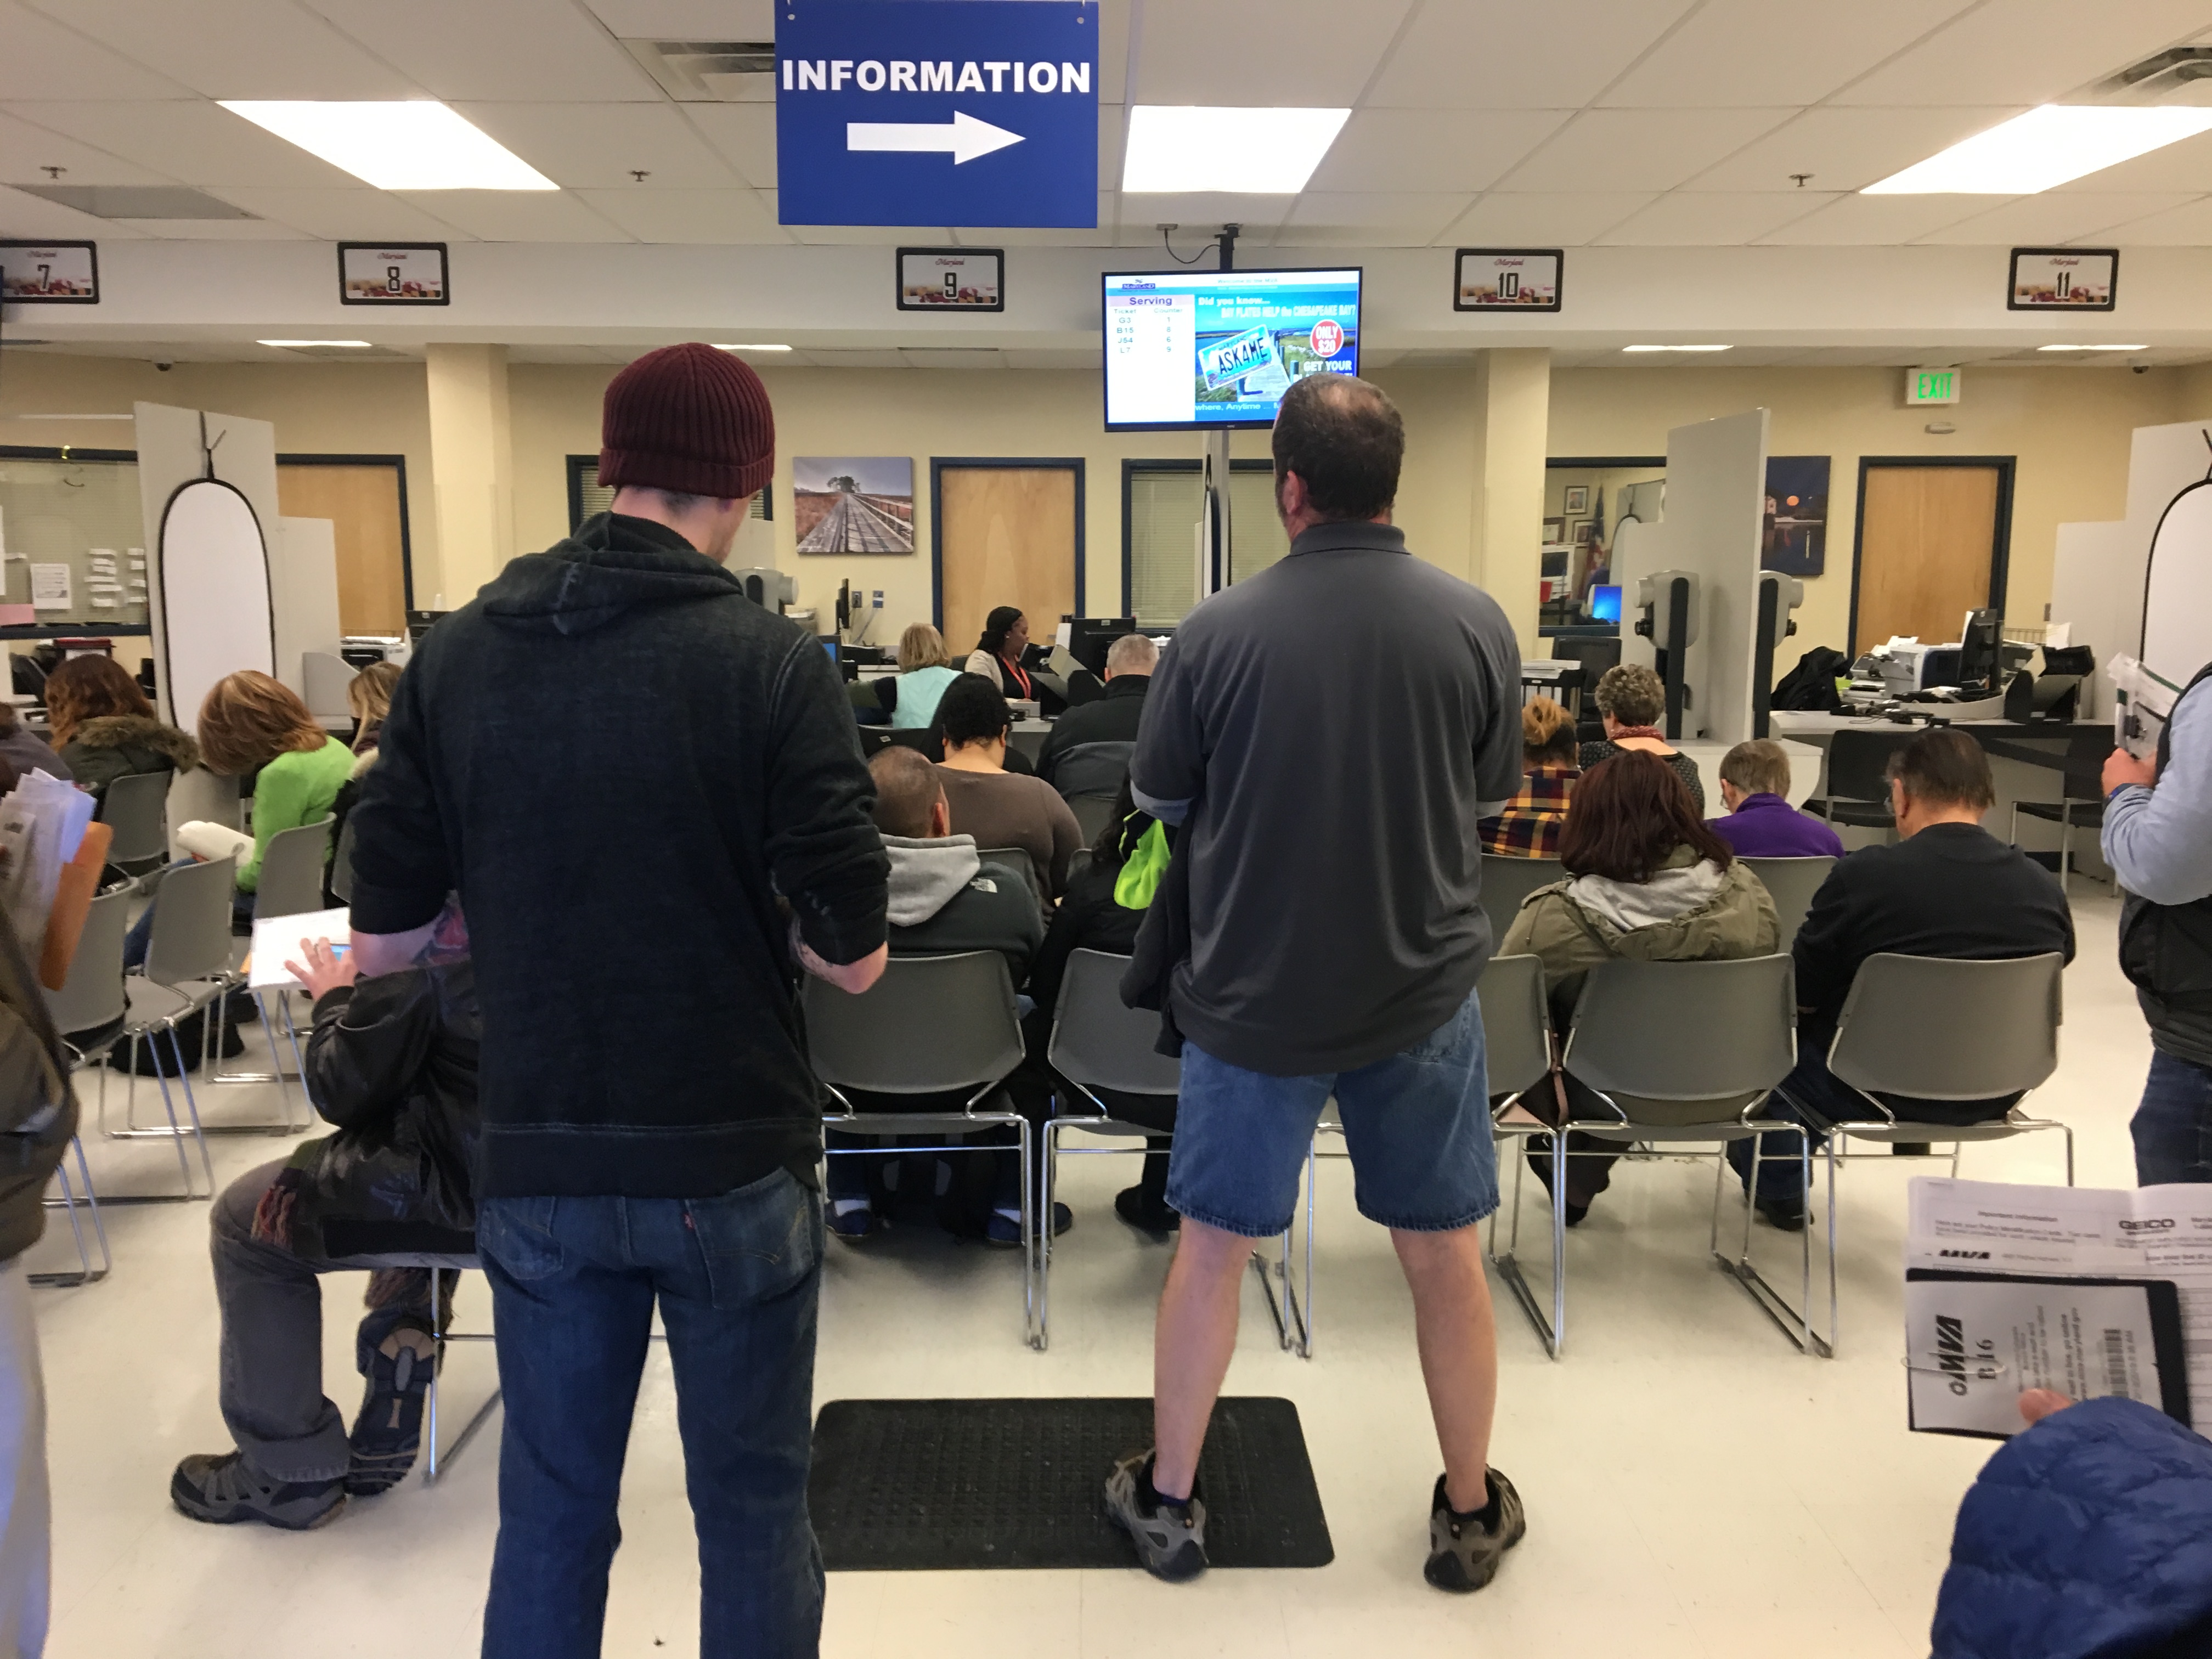 New driver’s license requirements producing anger, frustration